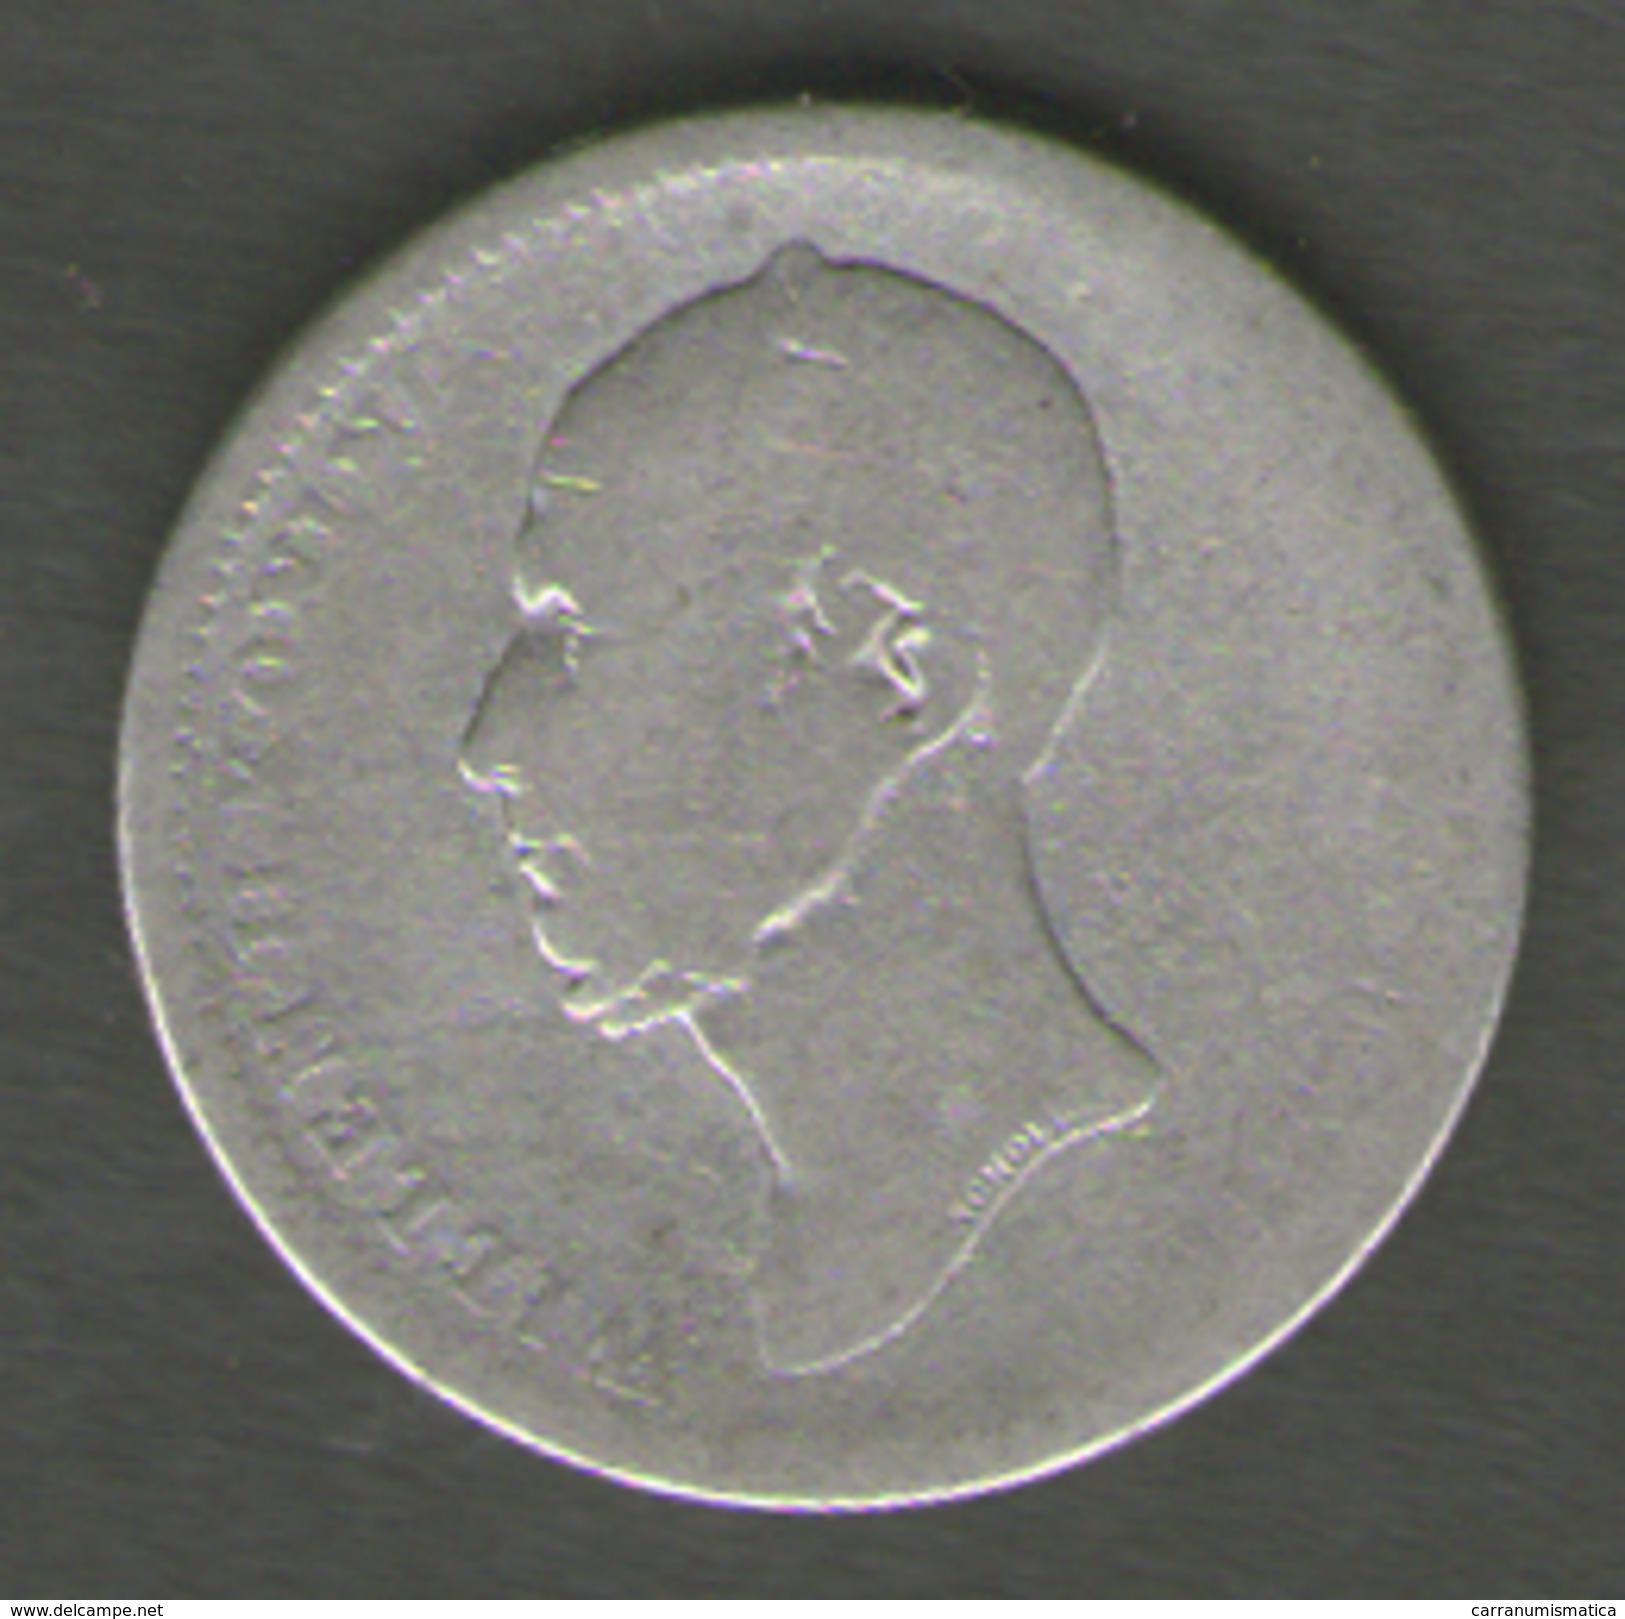 PAESI PASSI 25 CENTS 1849 AG SILVER - 1840-1849 : Willem II